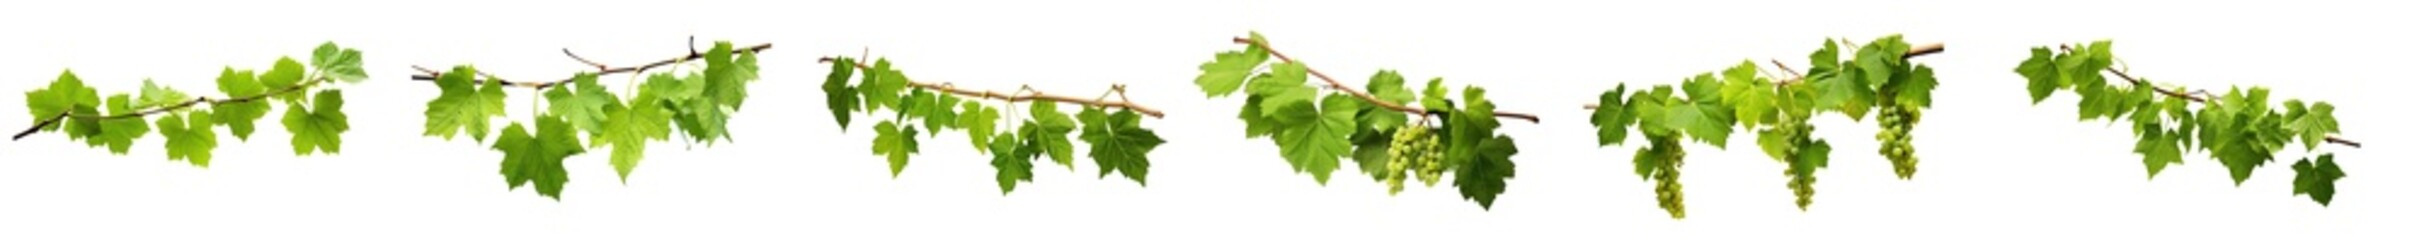 Collection of green grape ivy plants, tropical hanging leaves, and border decoration plants, isolated on a transparent background with PNG, cutout, or clipping path.